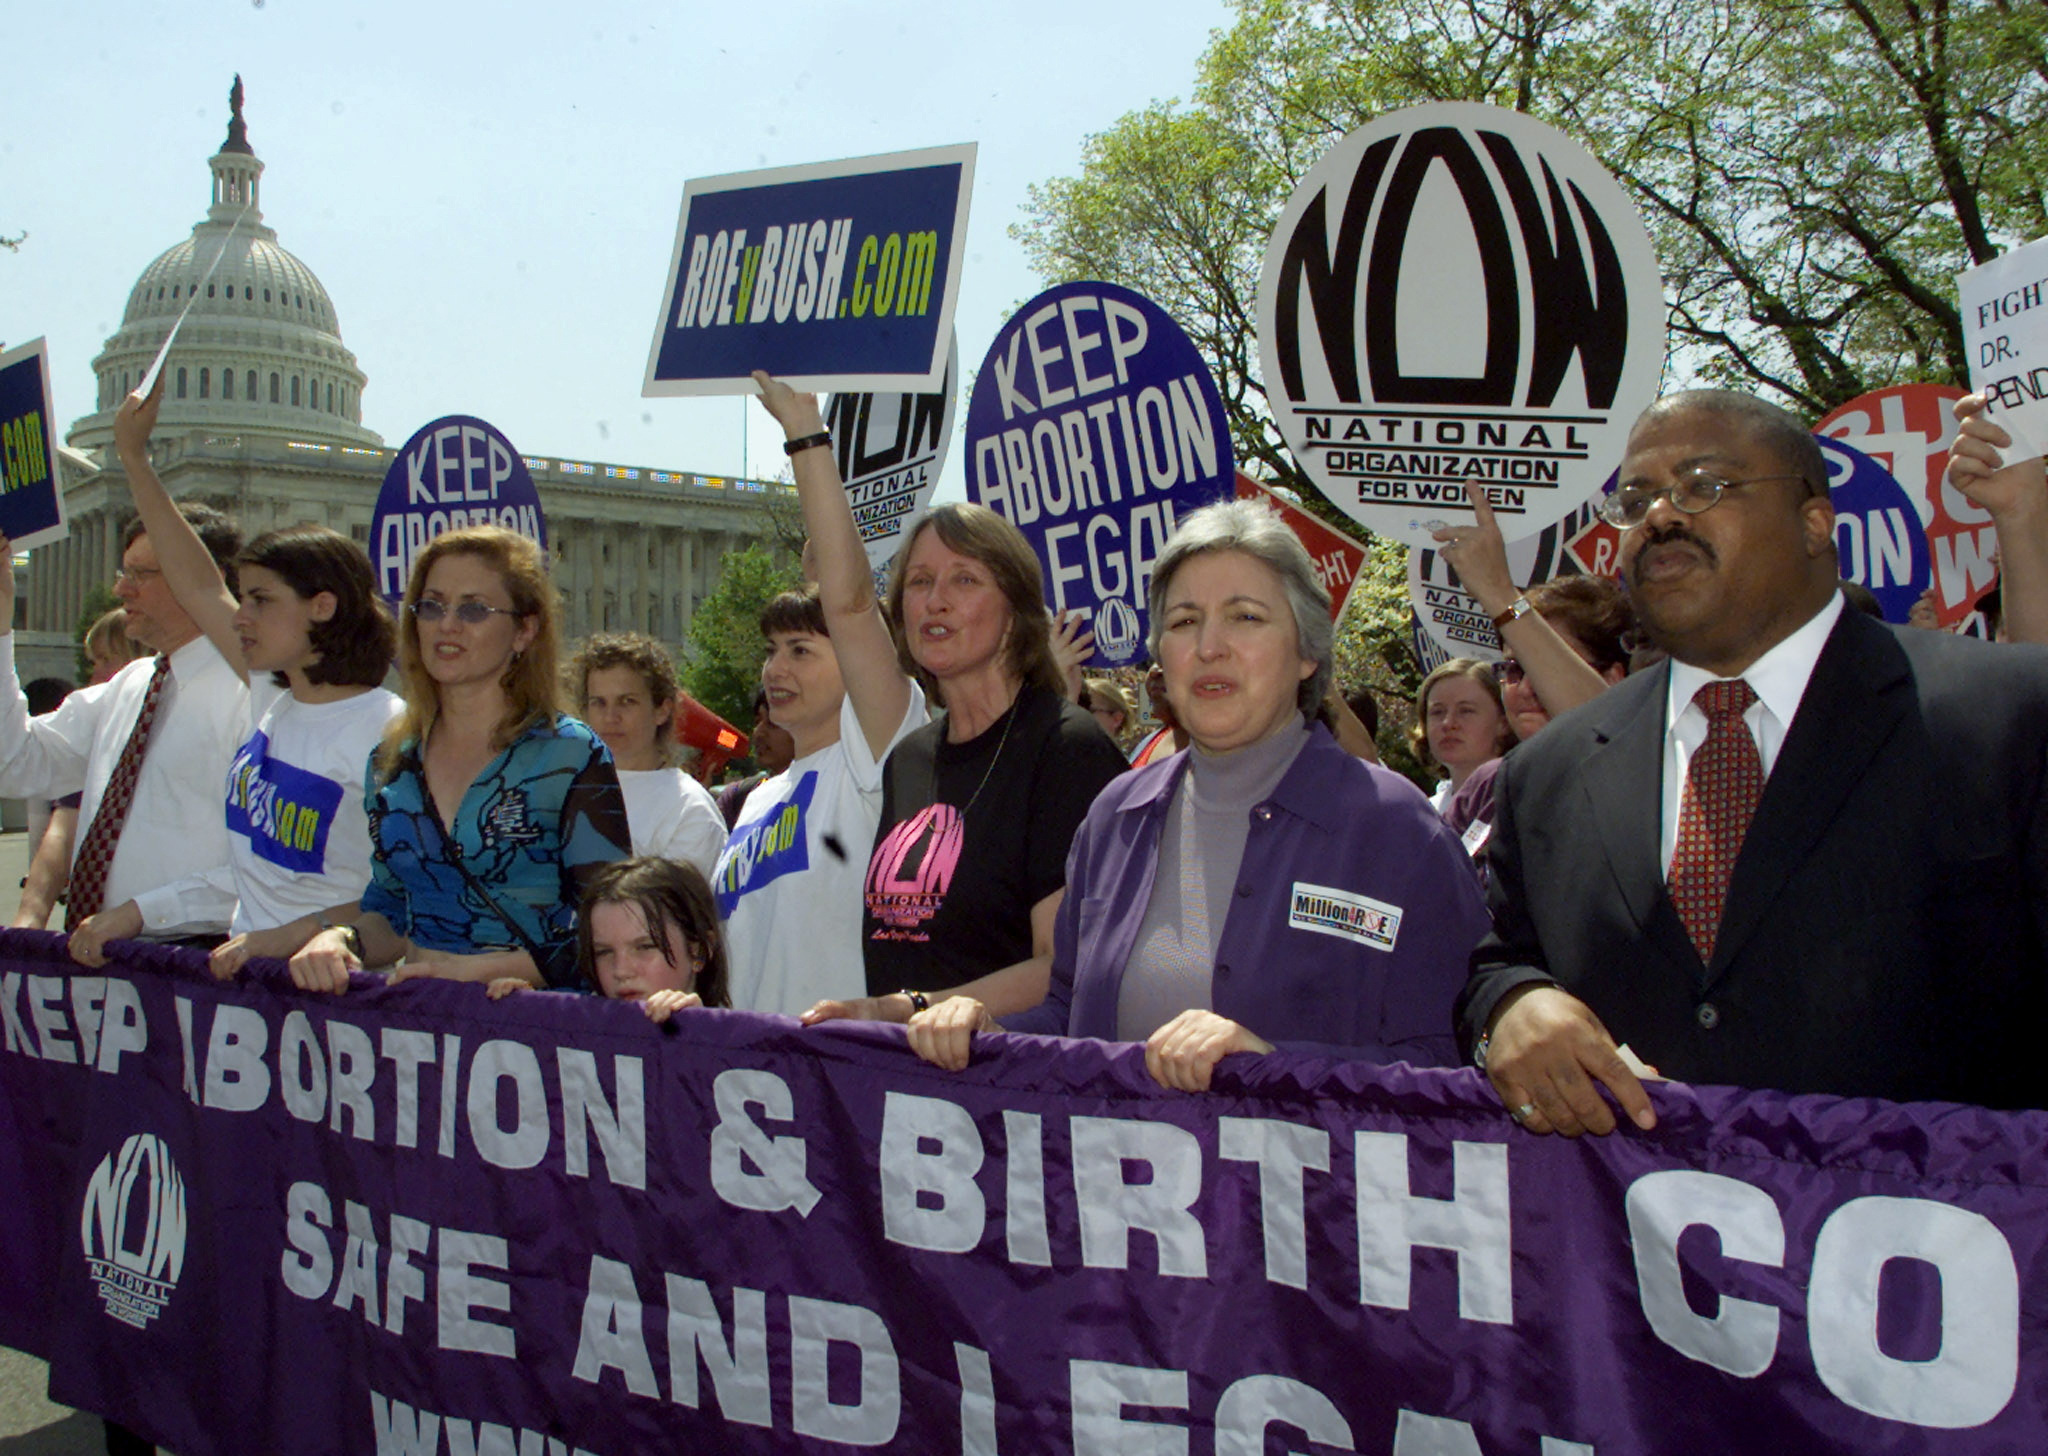 National Organization for Women president Patricia Ireland (C) marches with pro-choice supporters past the U.S. Capitol Building in Washington